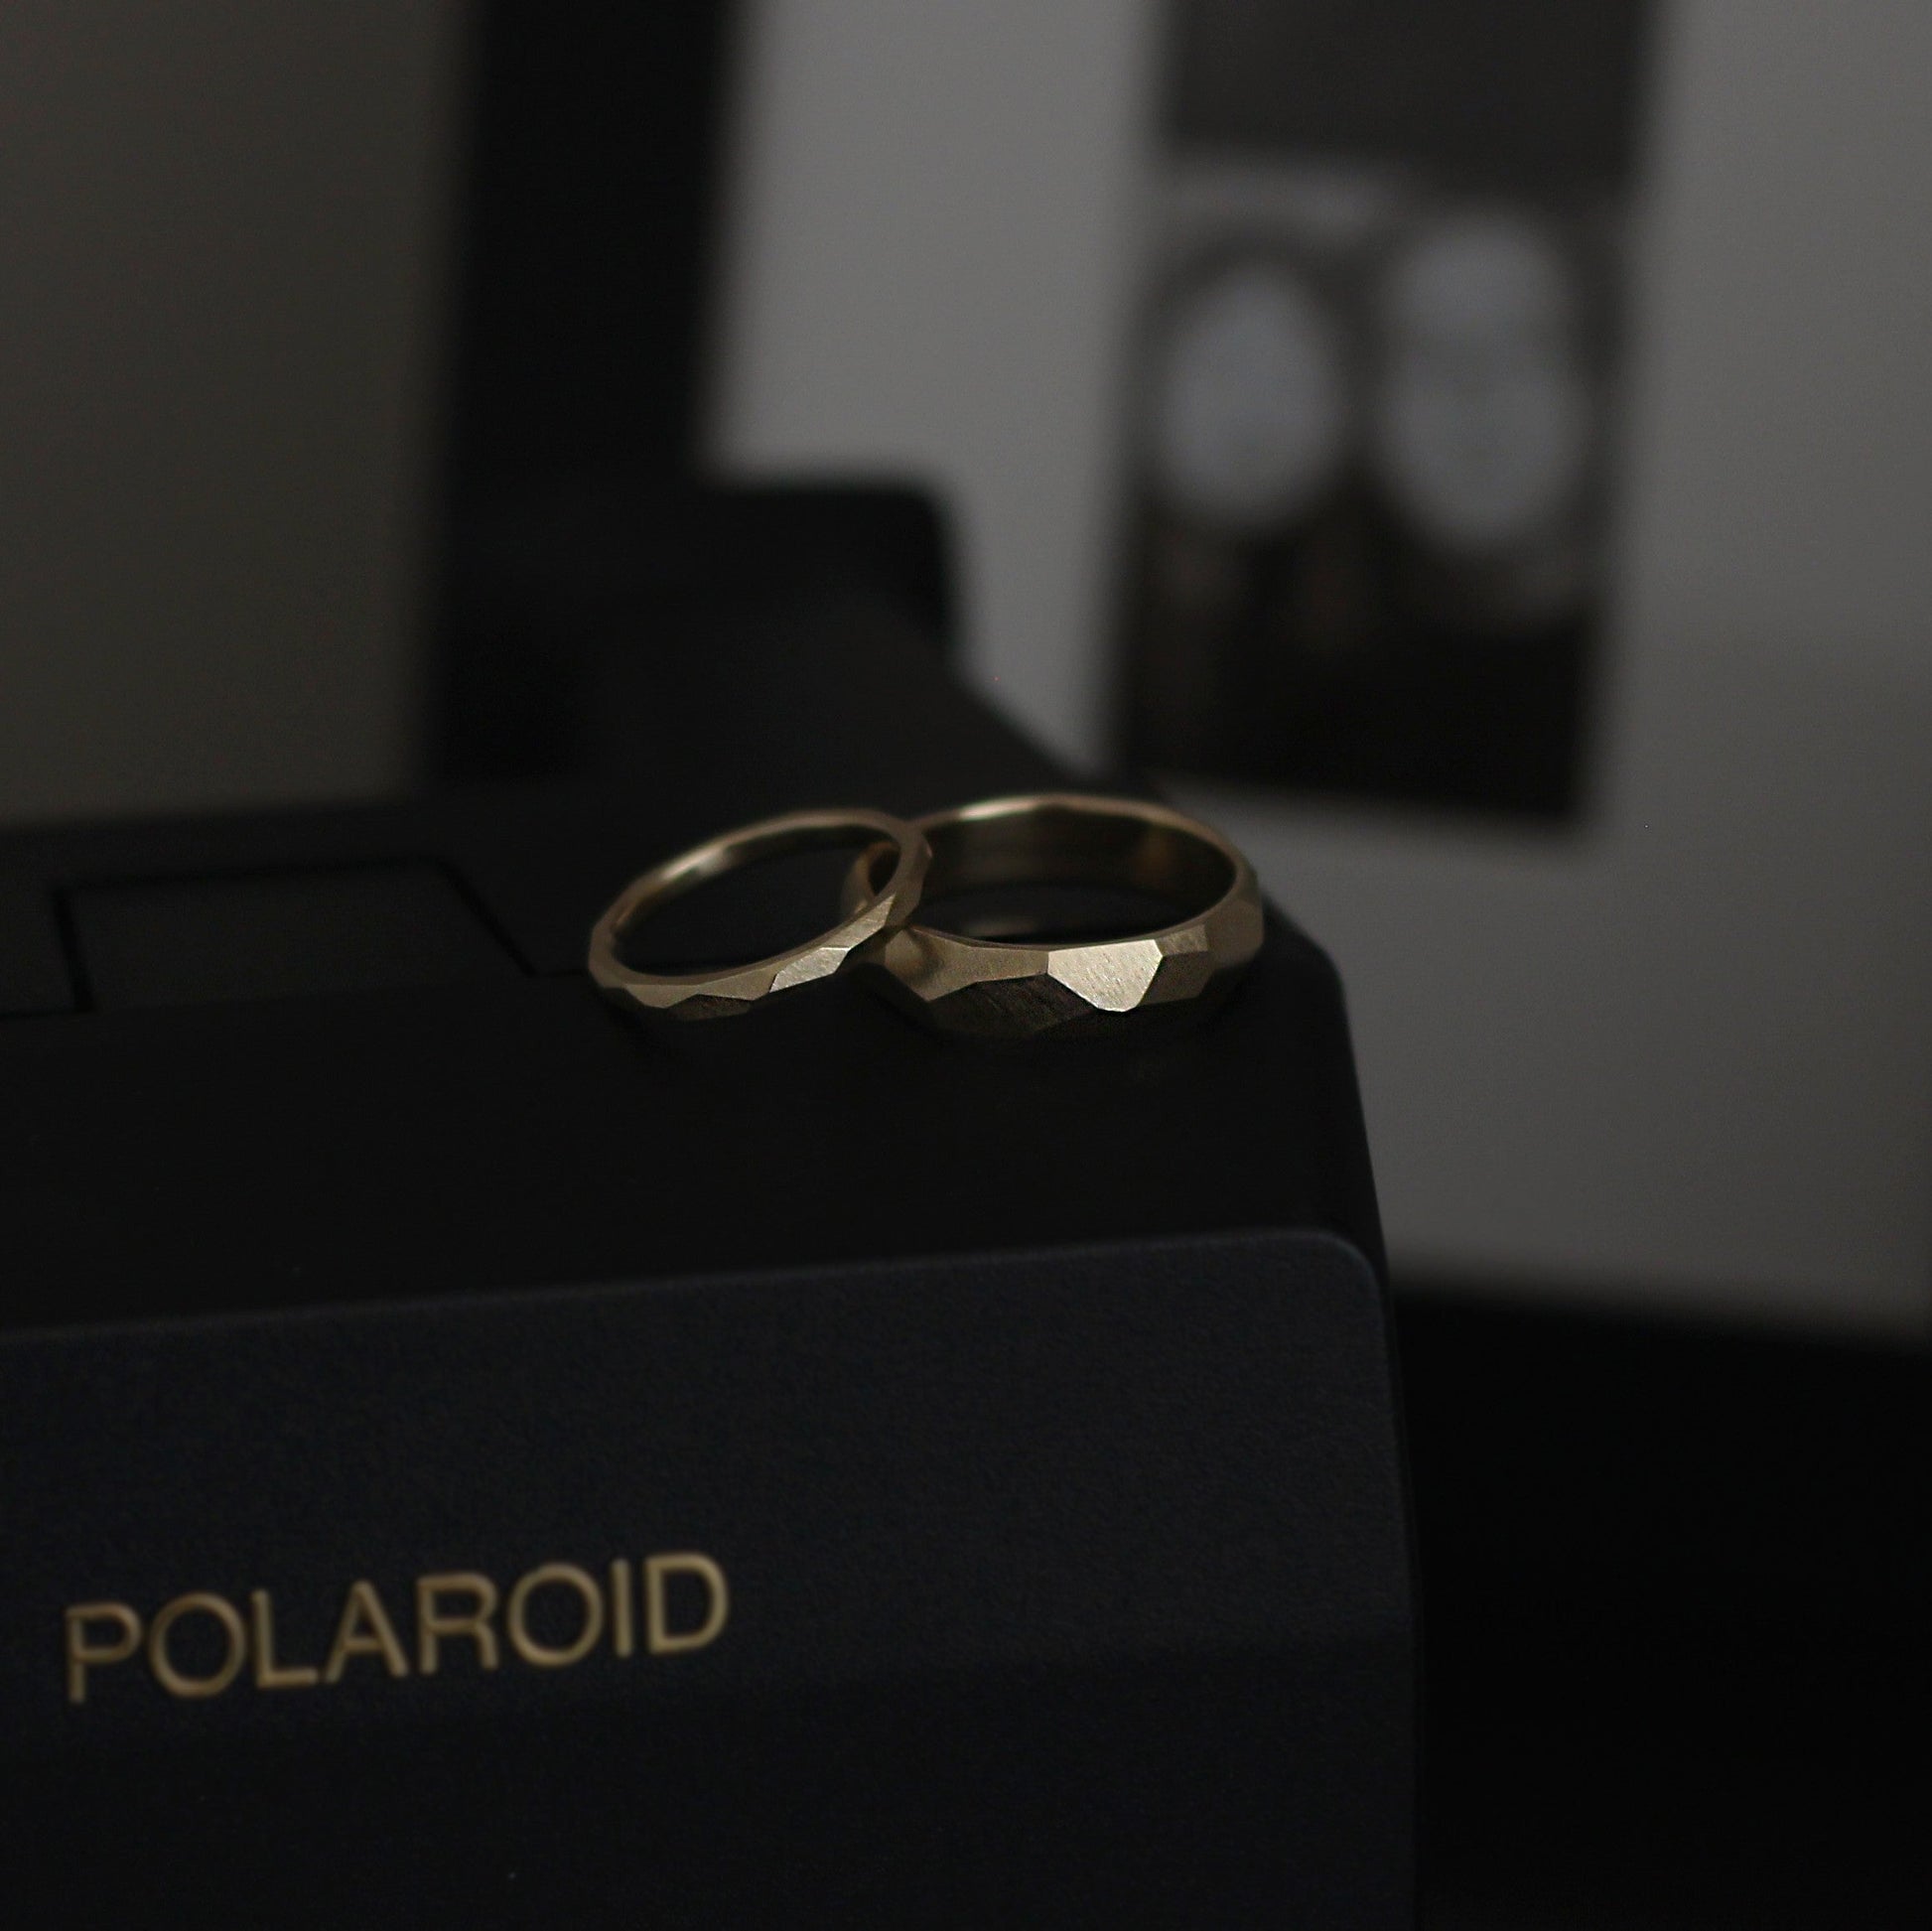 Geometric Faceted Ring - 9ct/18ct Gold, 2mm and 5mm width on a polaroid camera - Aisling Chou Studio